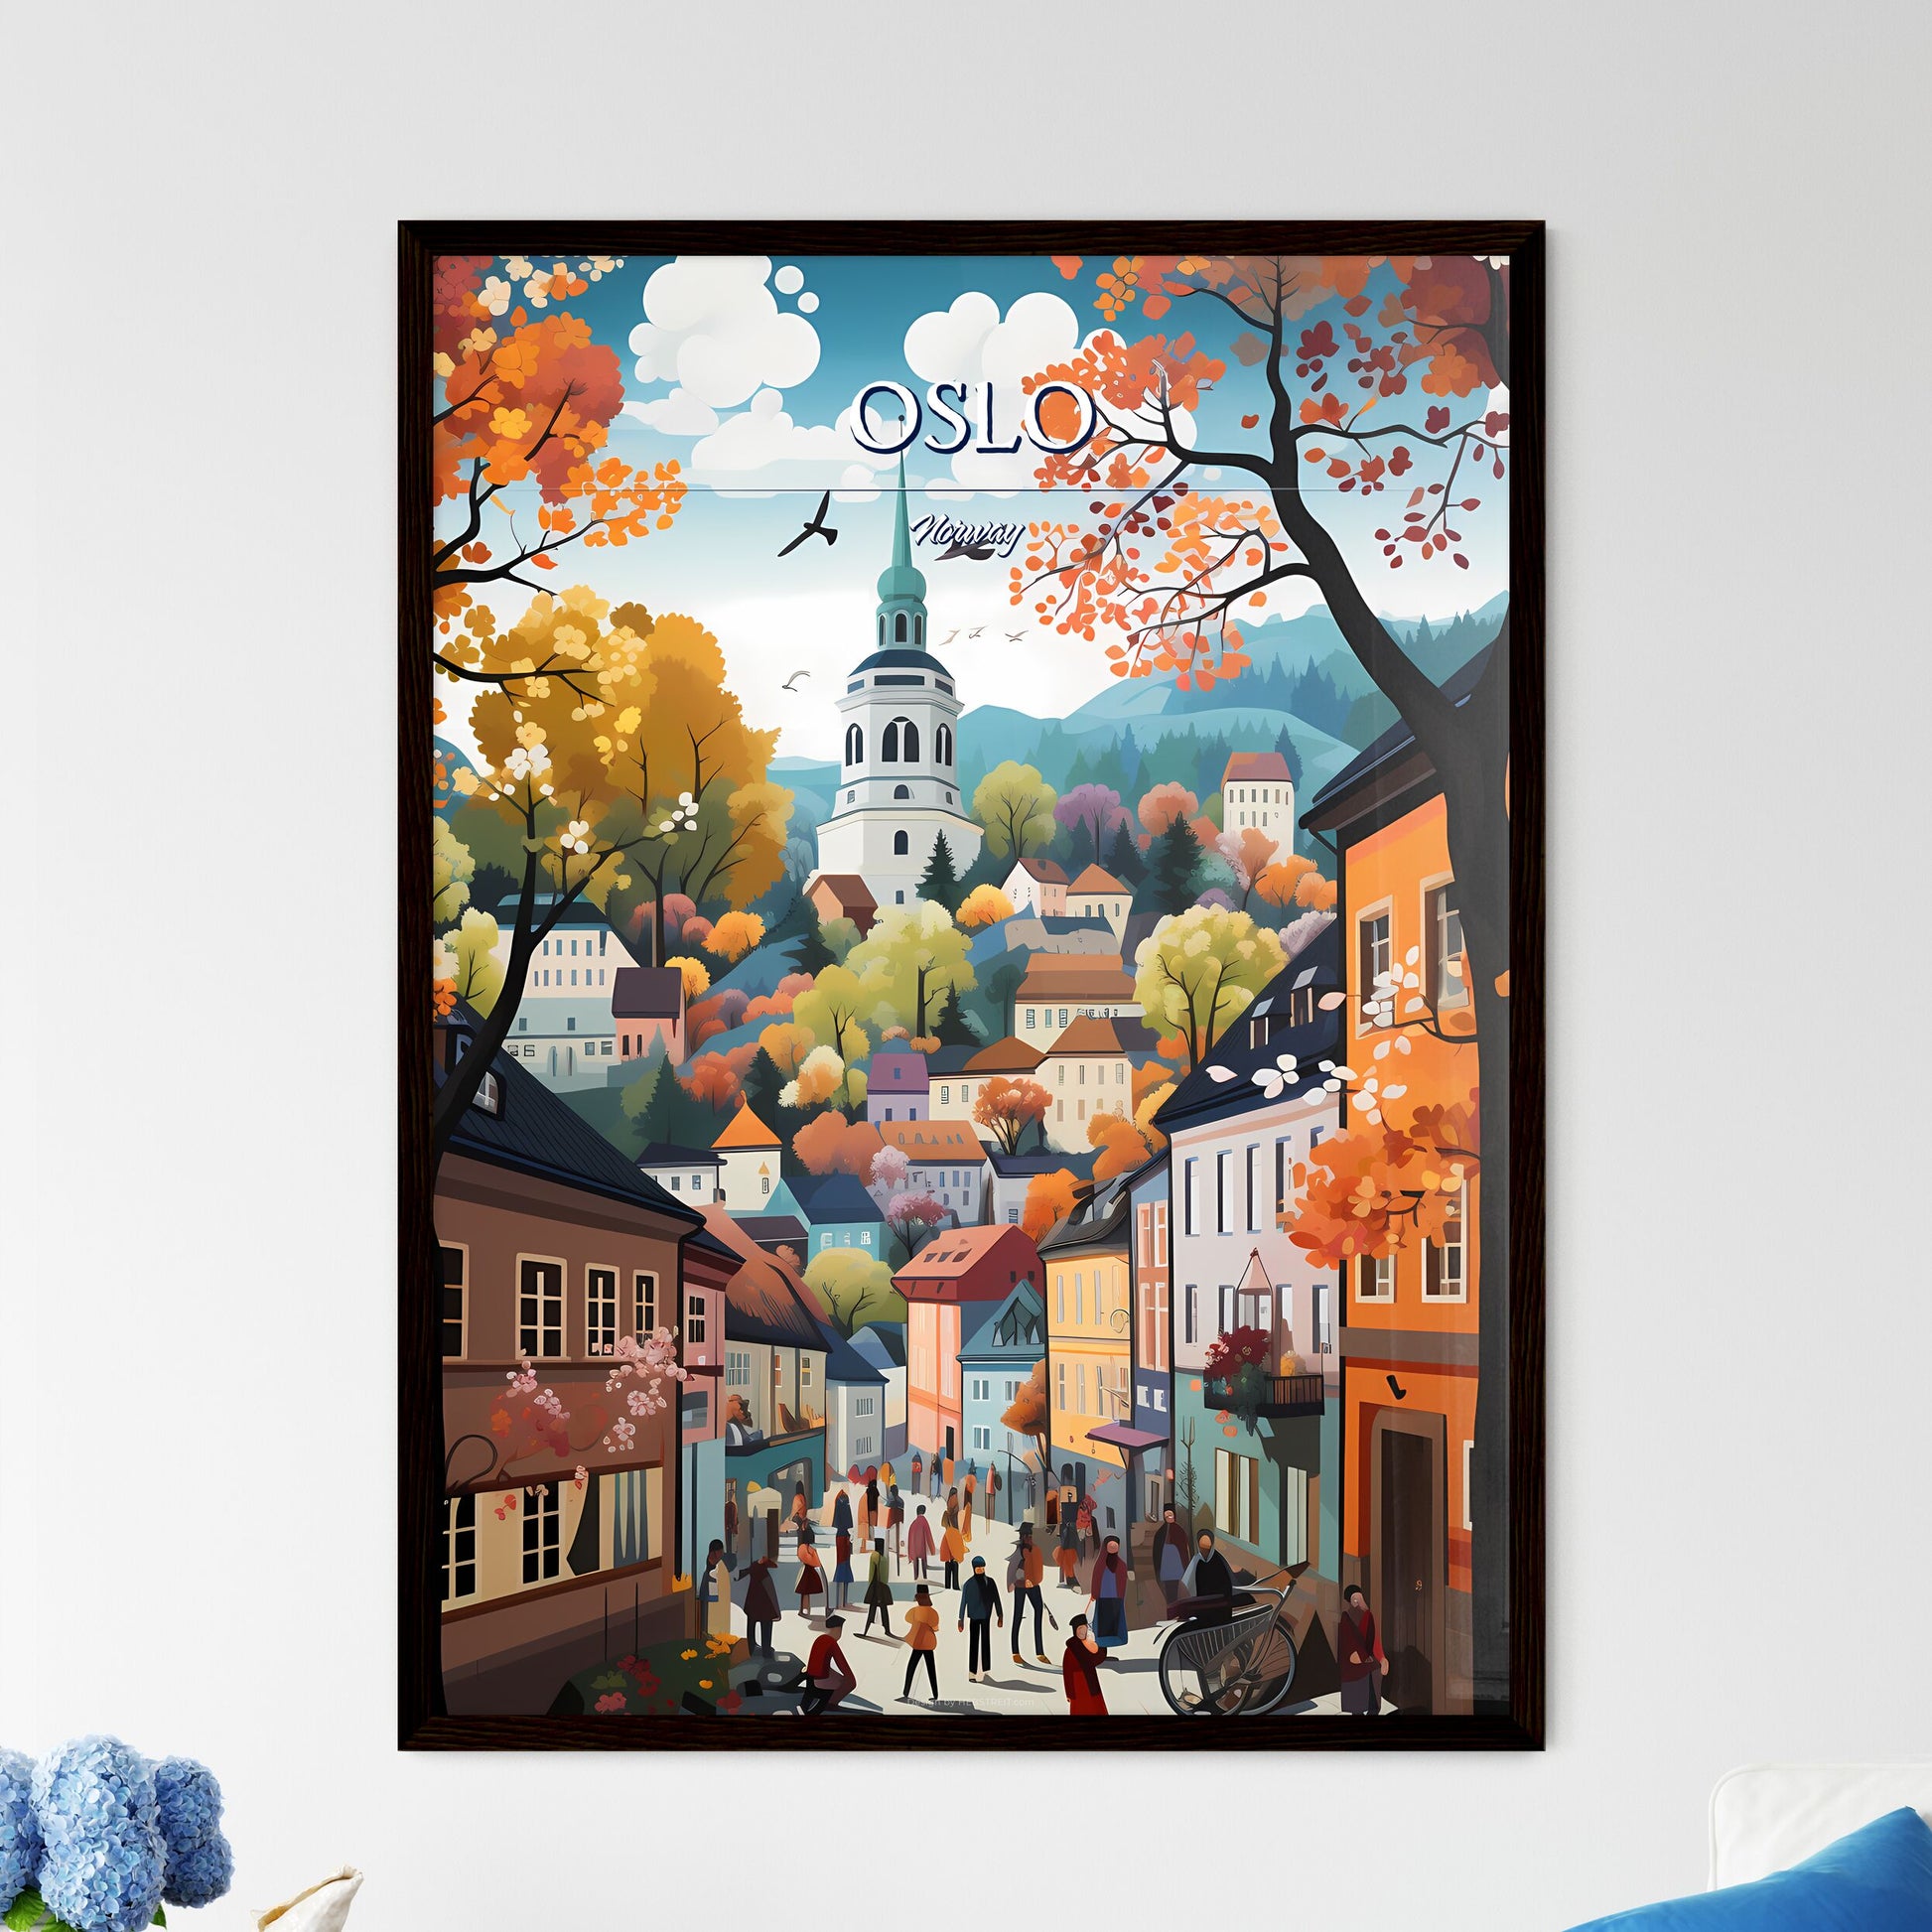 Oslo, Norway - Art print of a painting of a town with trees and a church Default Title